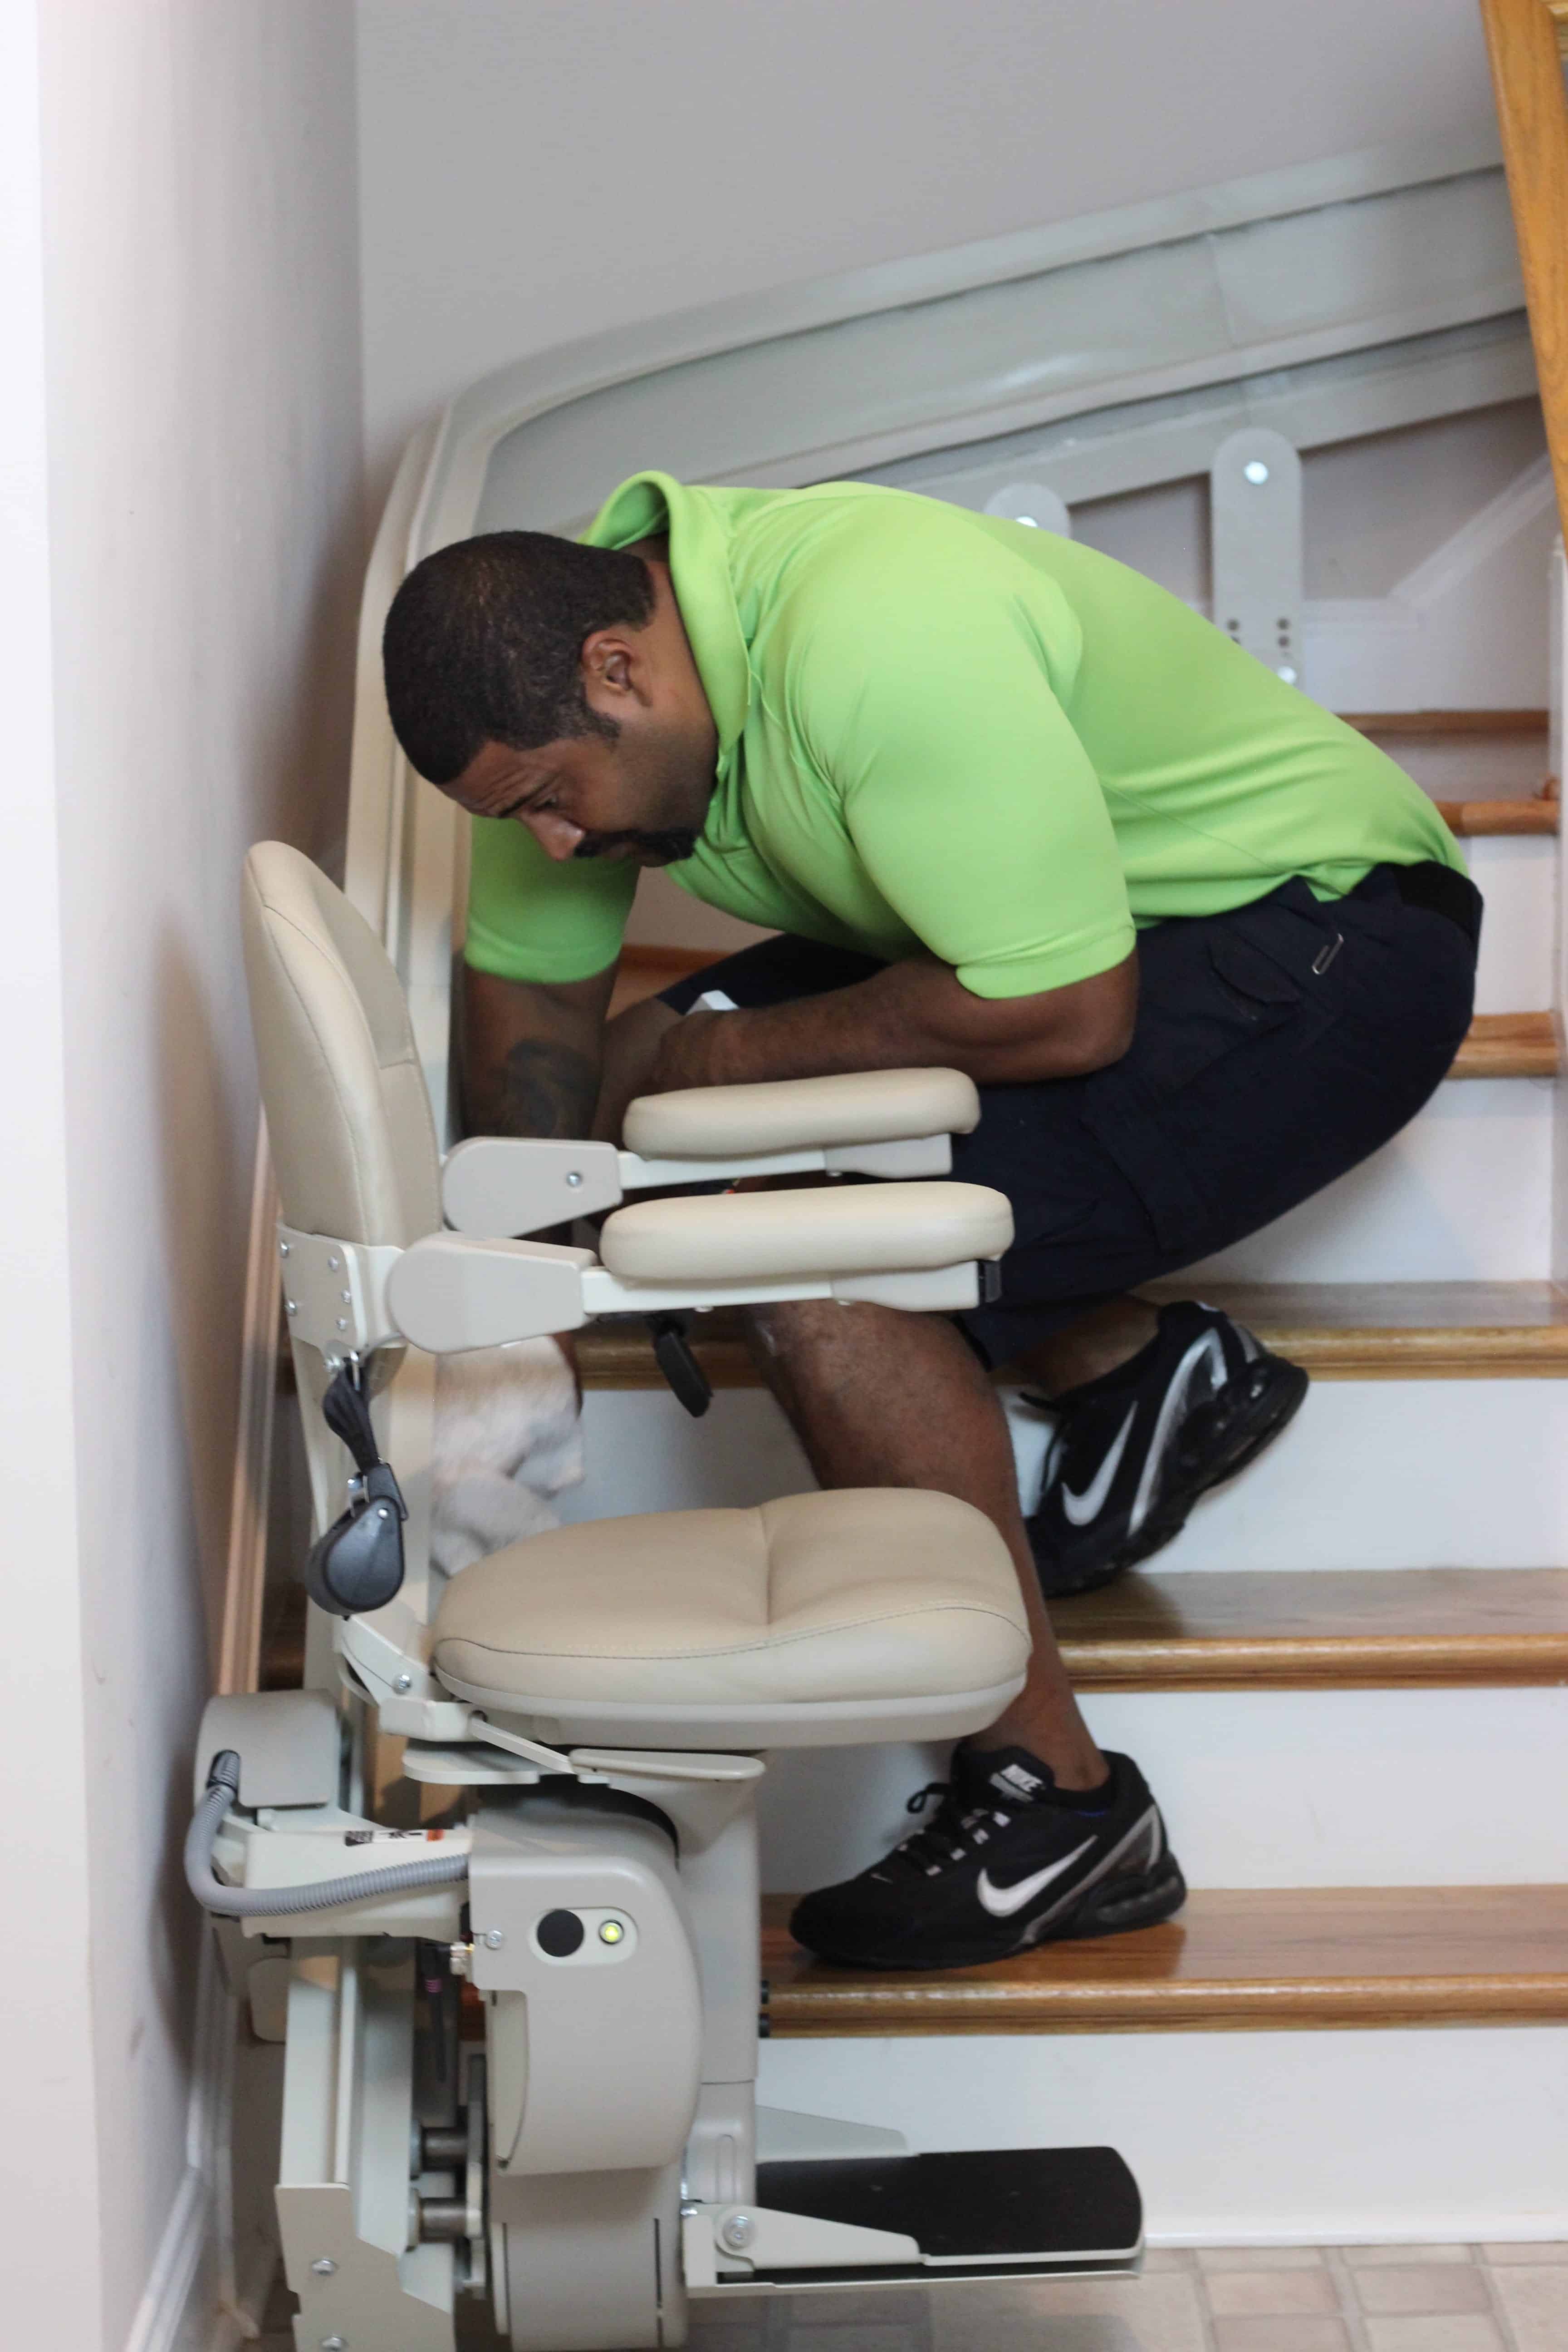 Professional stair lift installation included in cost